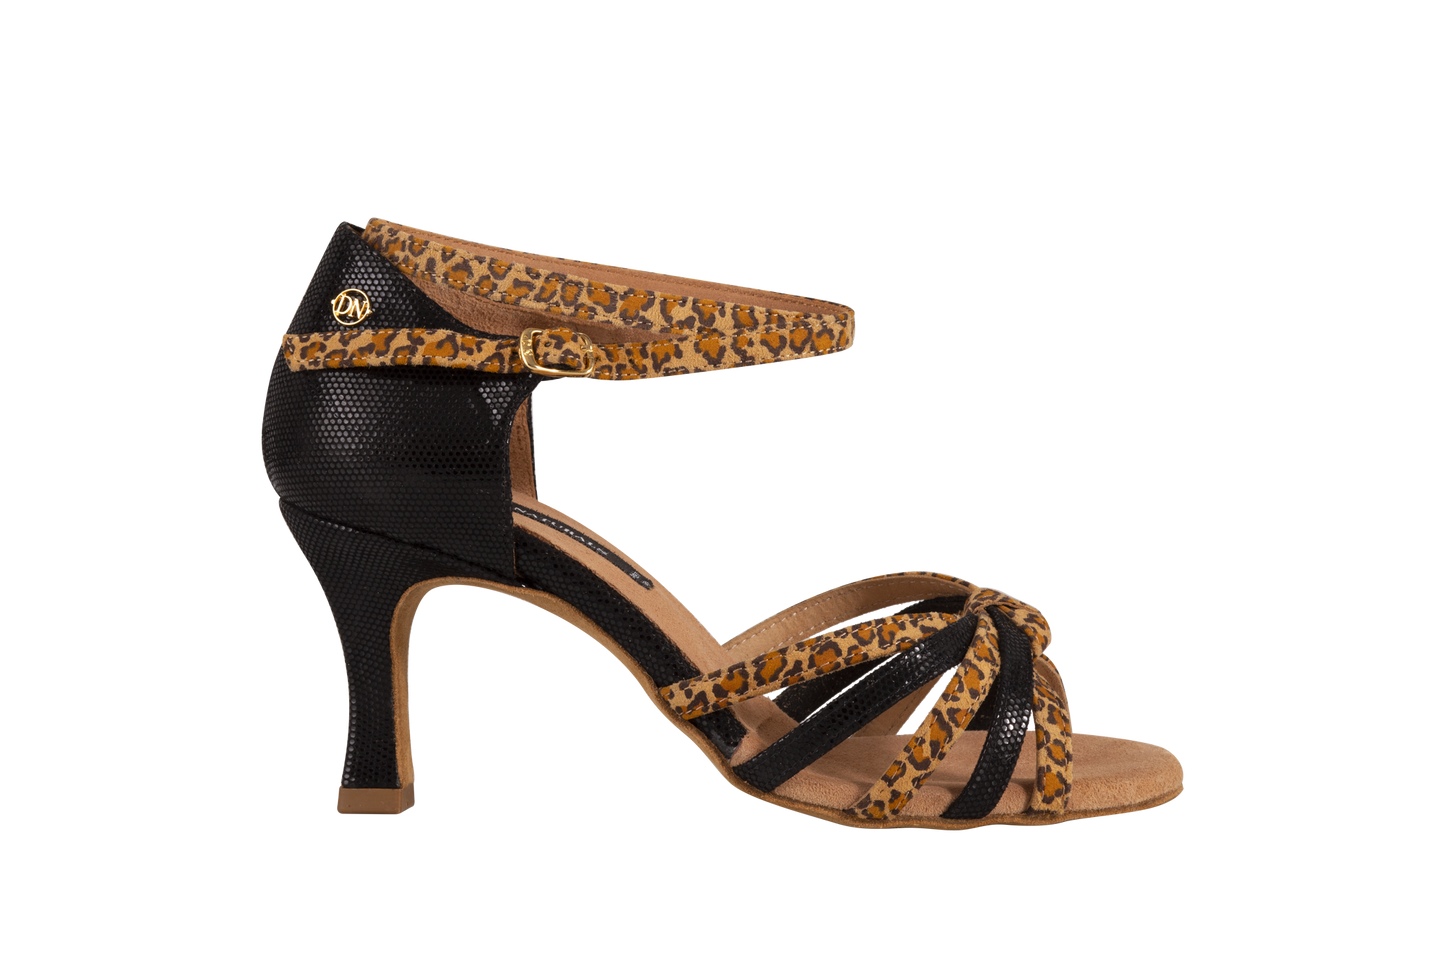 Dance Naturals 25 Canoa Black/Leopard Print Knotted Multi-Strap Latin Dance Shoe with Double Ankle Strap